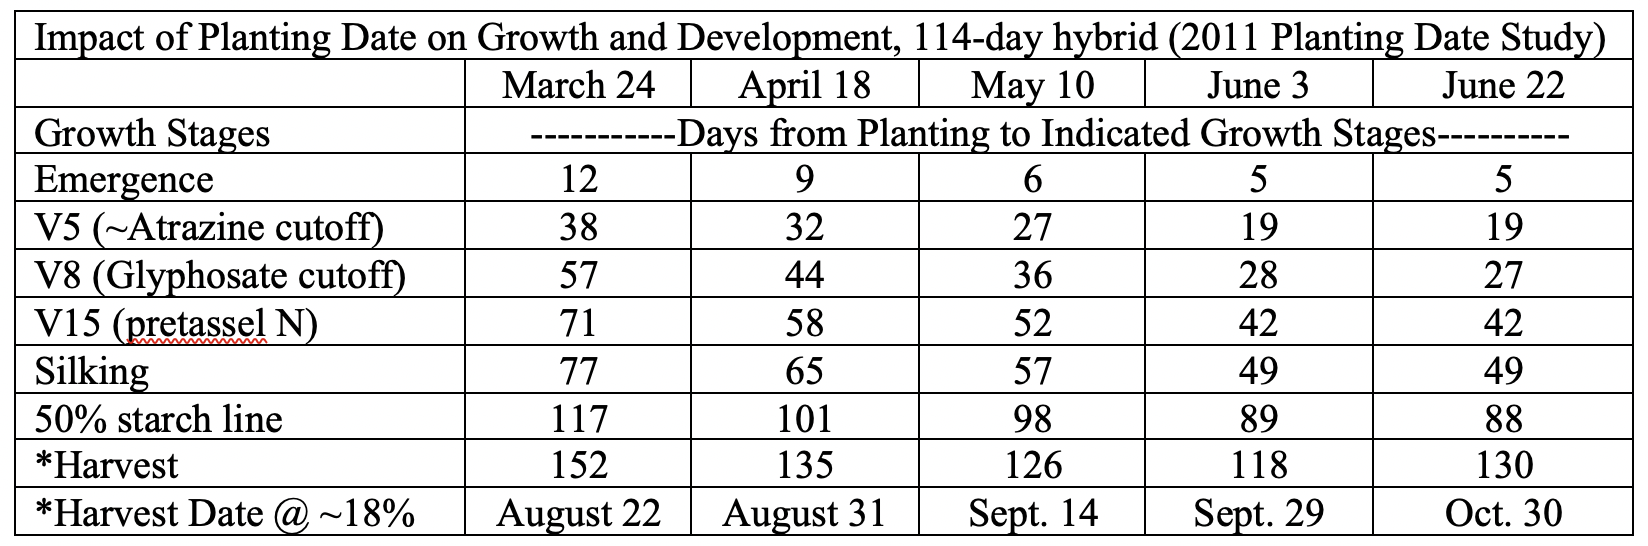 Impact of Planting Date on Growth and Development, 114-day hybrid (2011 Planting Date Study)